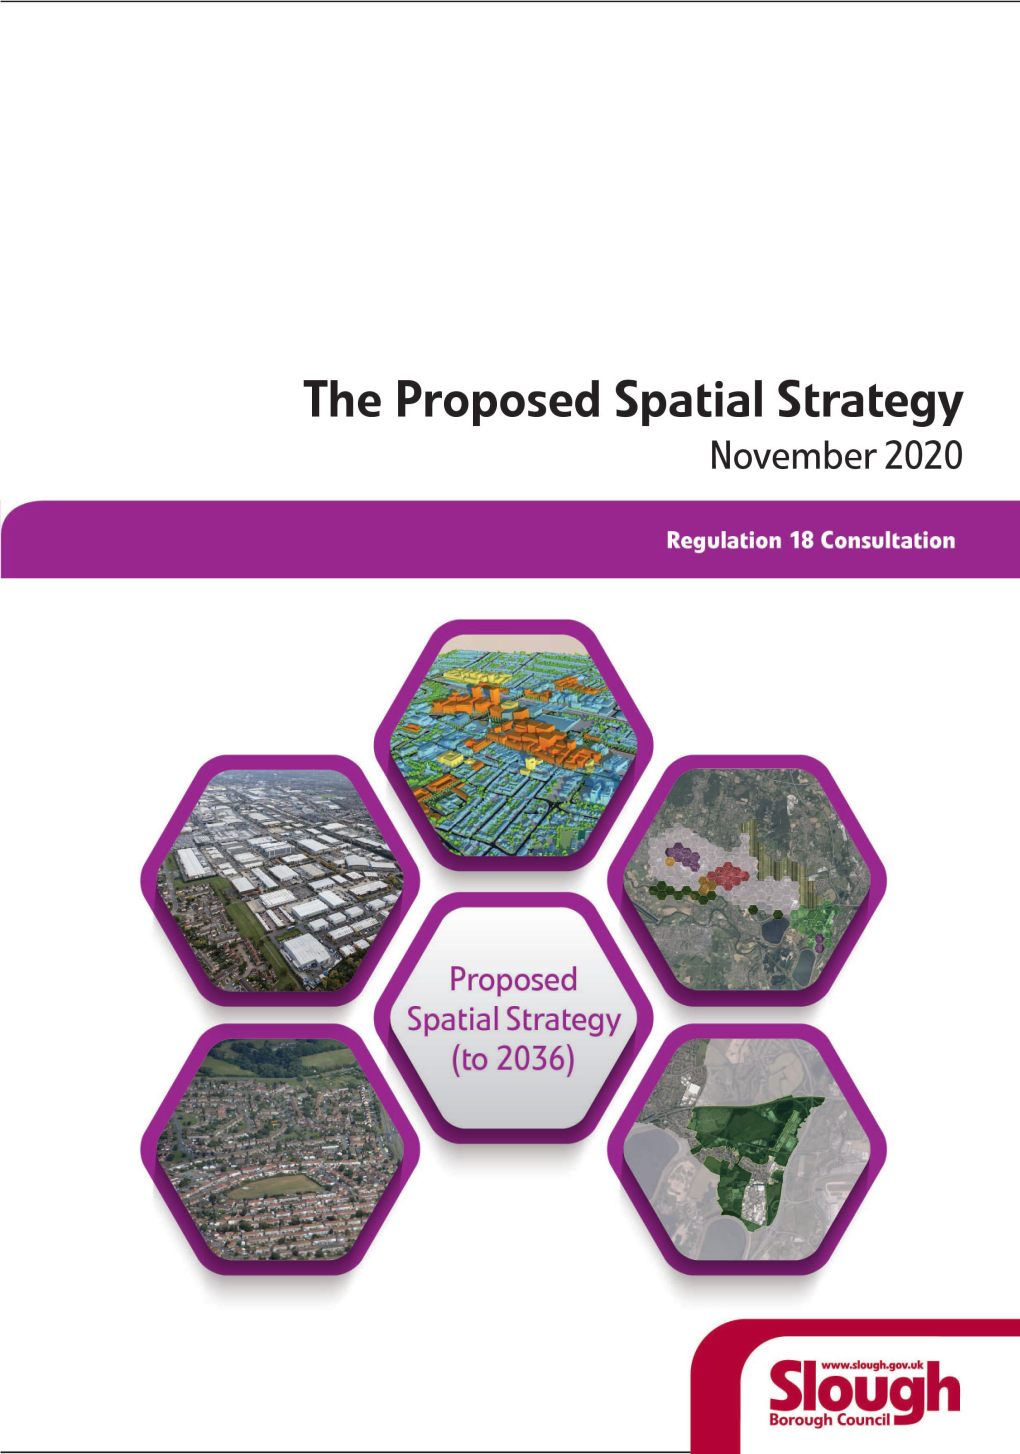 The Proposed Spatial Strategy Consultation Document, Please Specify the Section Or Paragraph Number in Your Response